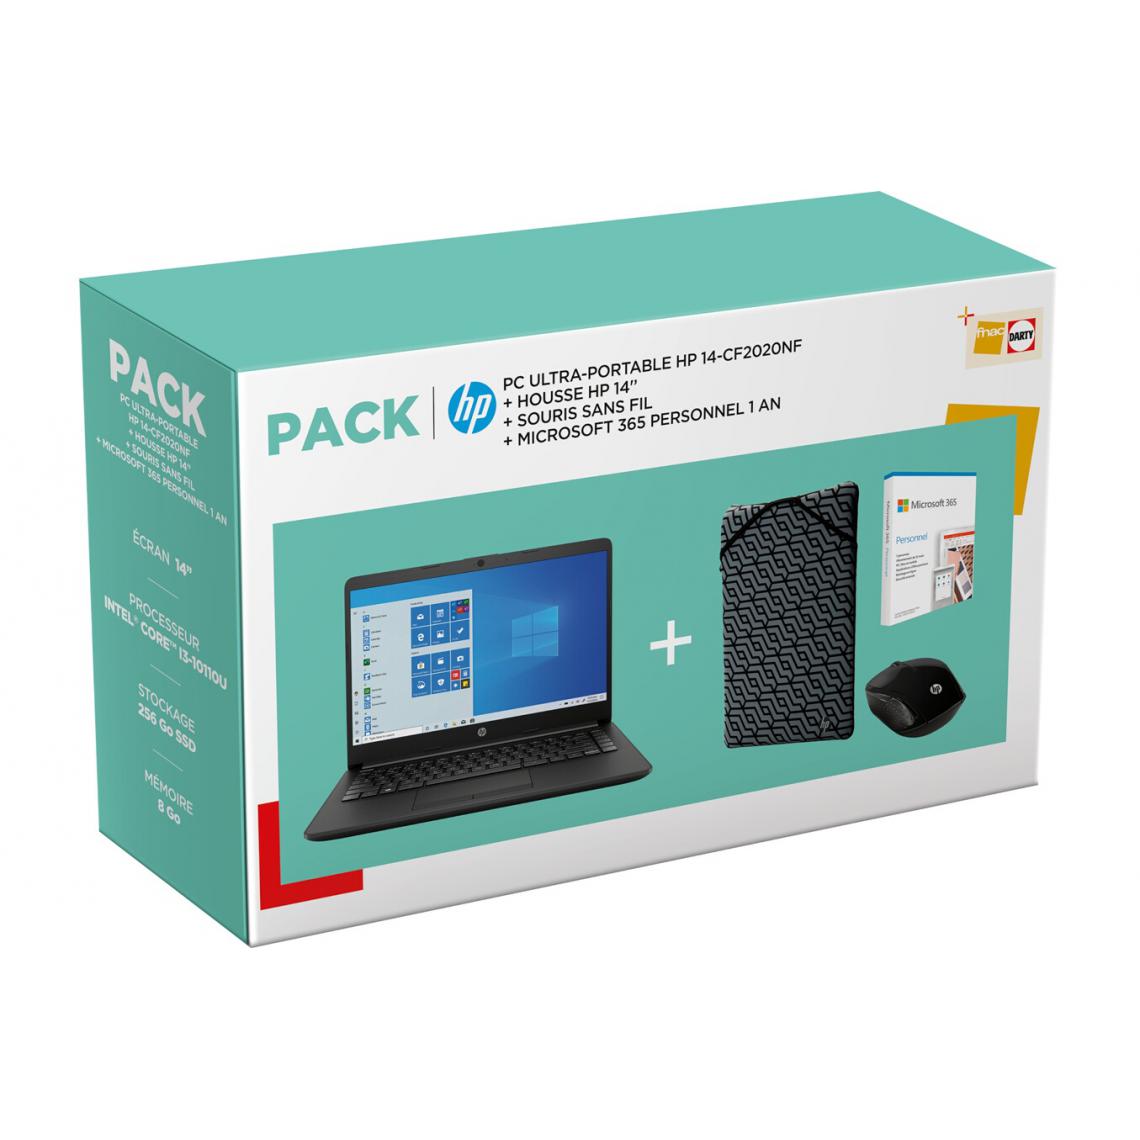 Hp - PACK HP 14-cf2020nf + Housse + Souris + Microsoft 365 Personnel 1 an - PC Portable